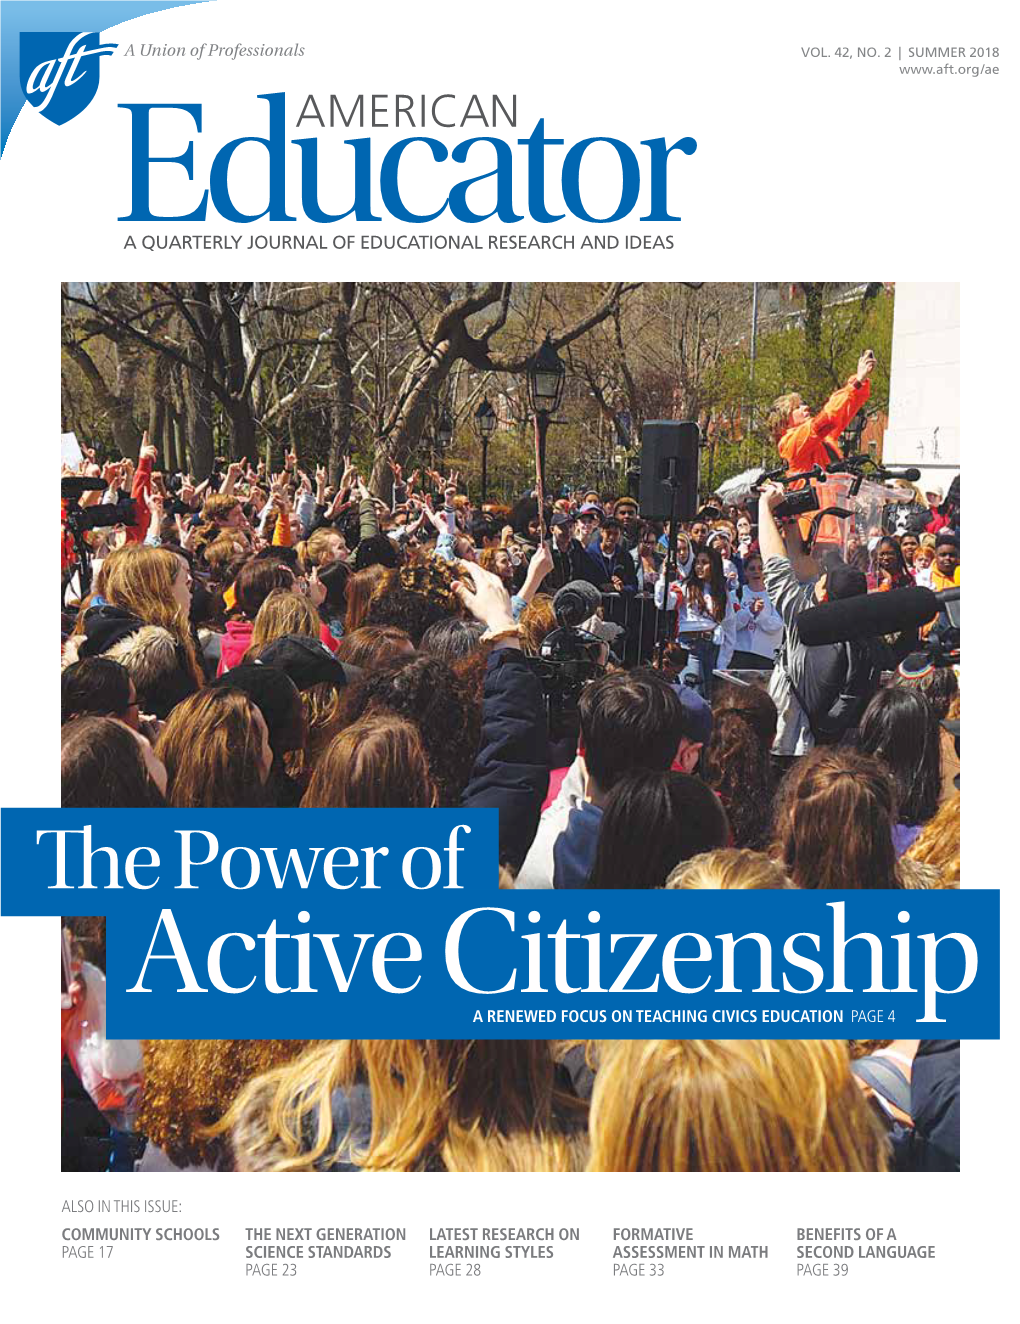 The Power of Active Citizenship a RENEWED FOCUS on TEACHING CIVICS EDUCATION PAGE 4